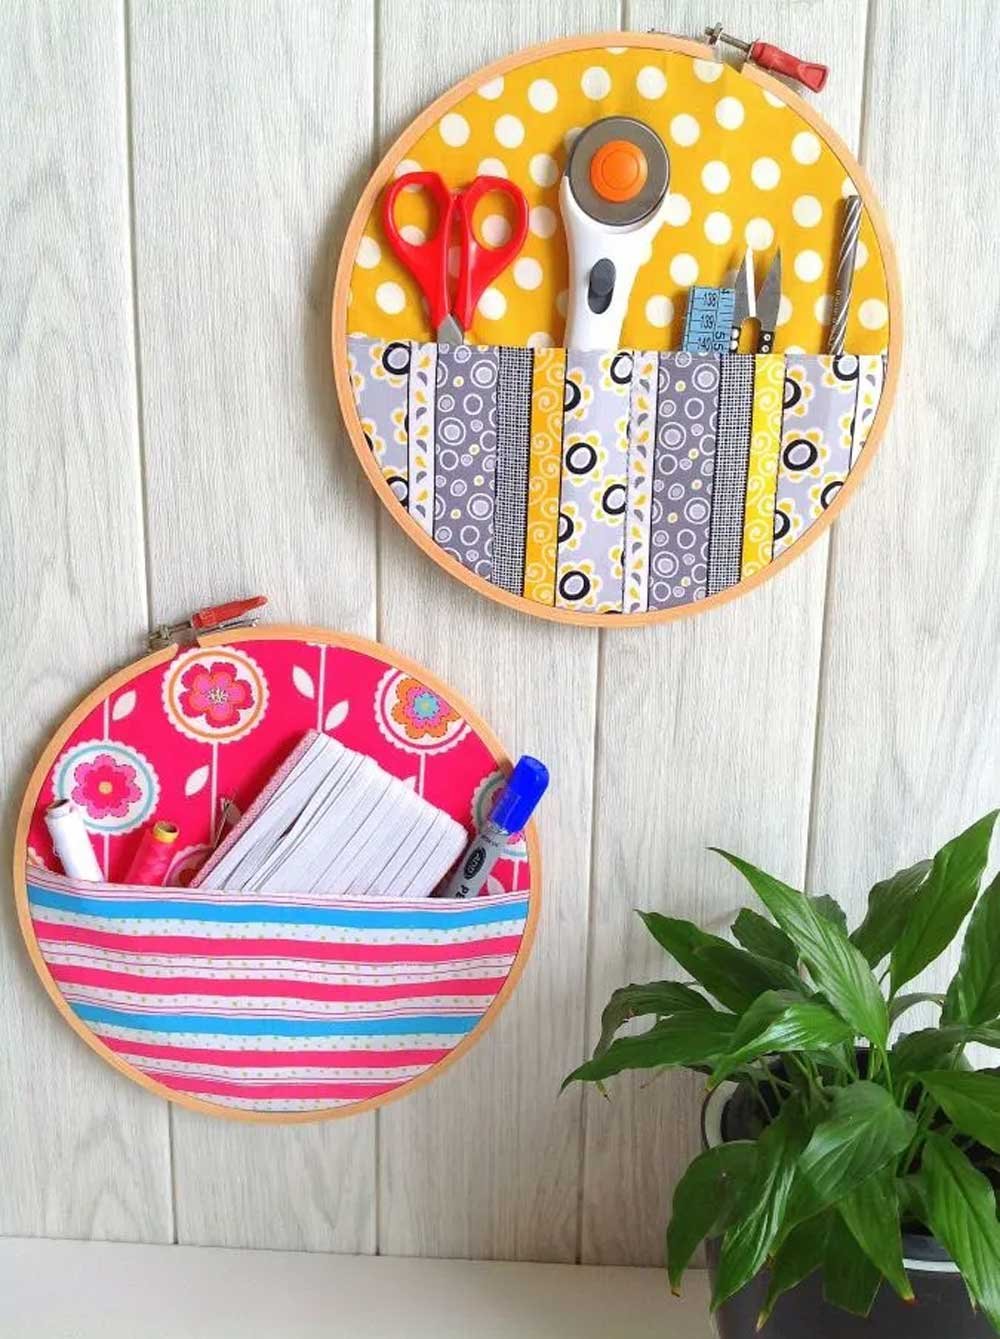 How to Make a Hoop Organizer